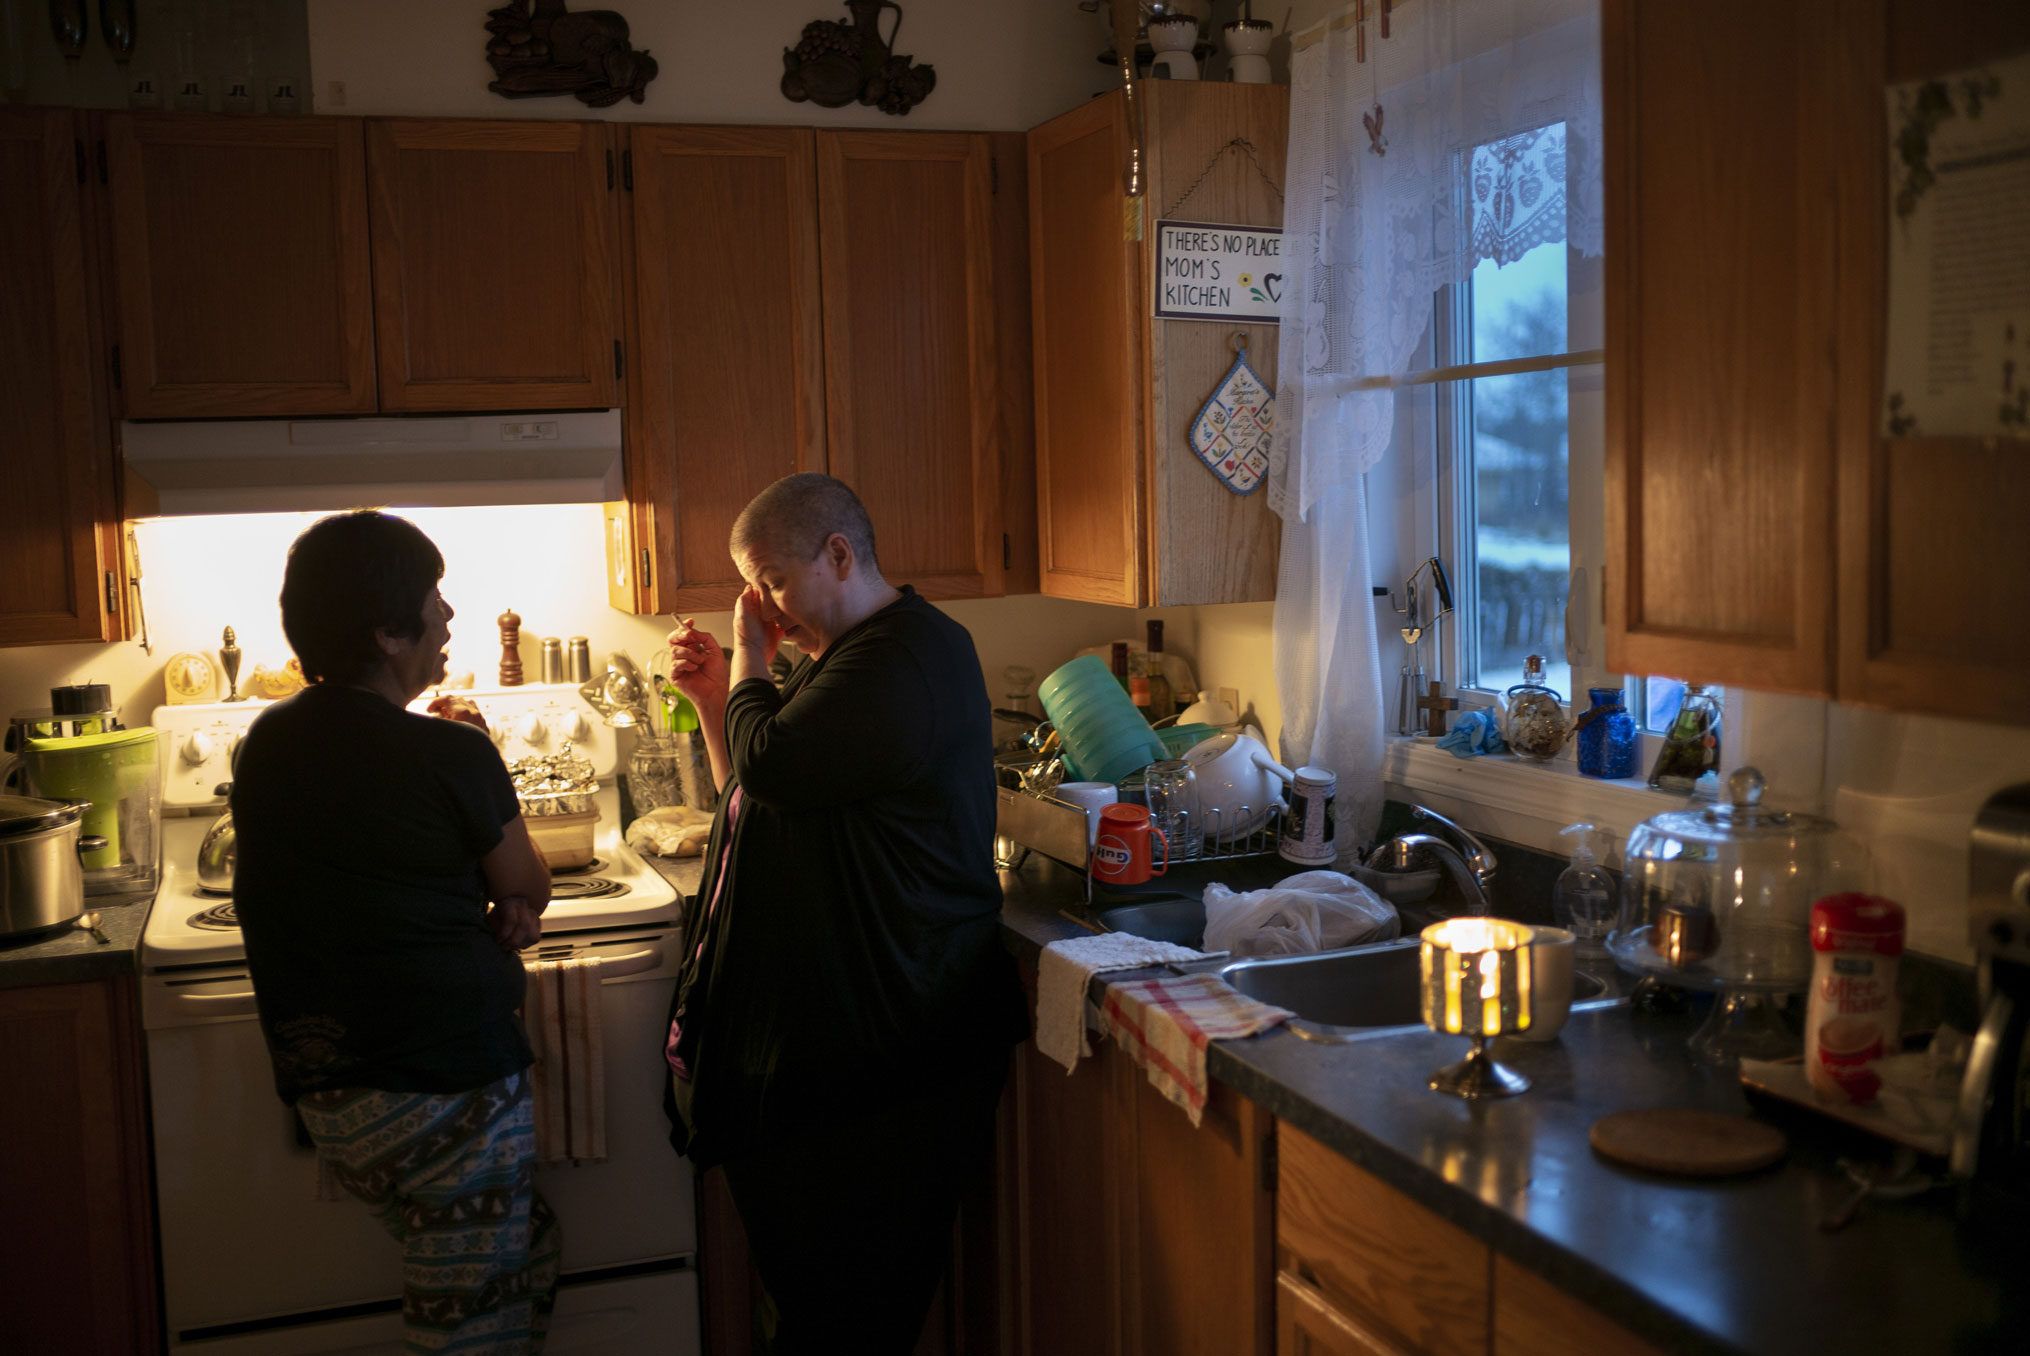 People grieve and smoke in a kitchen